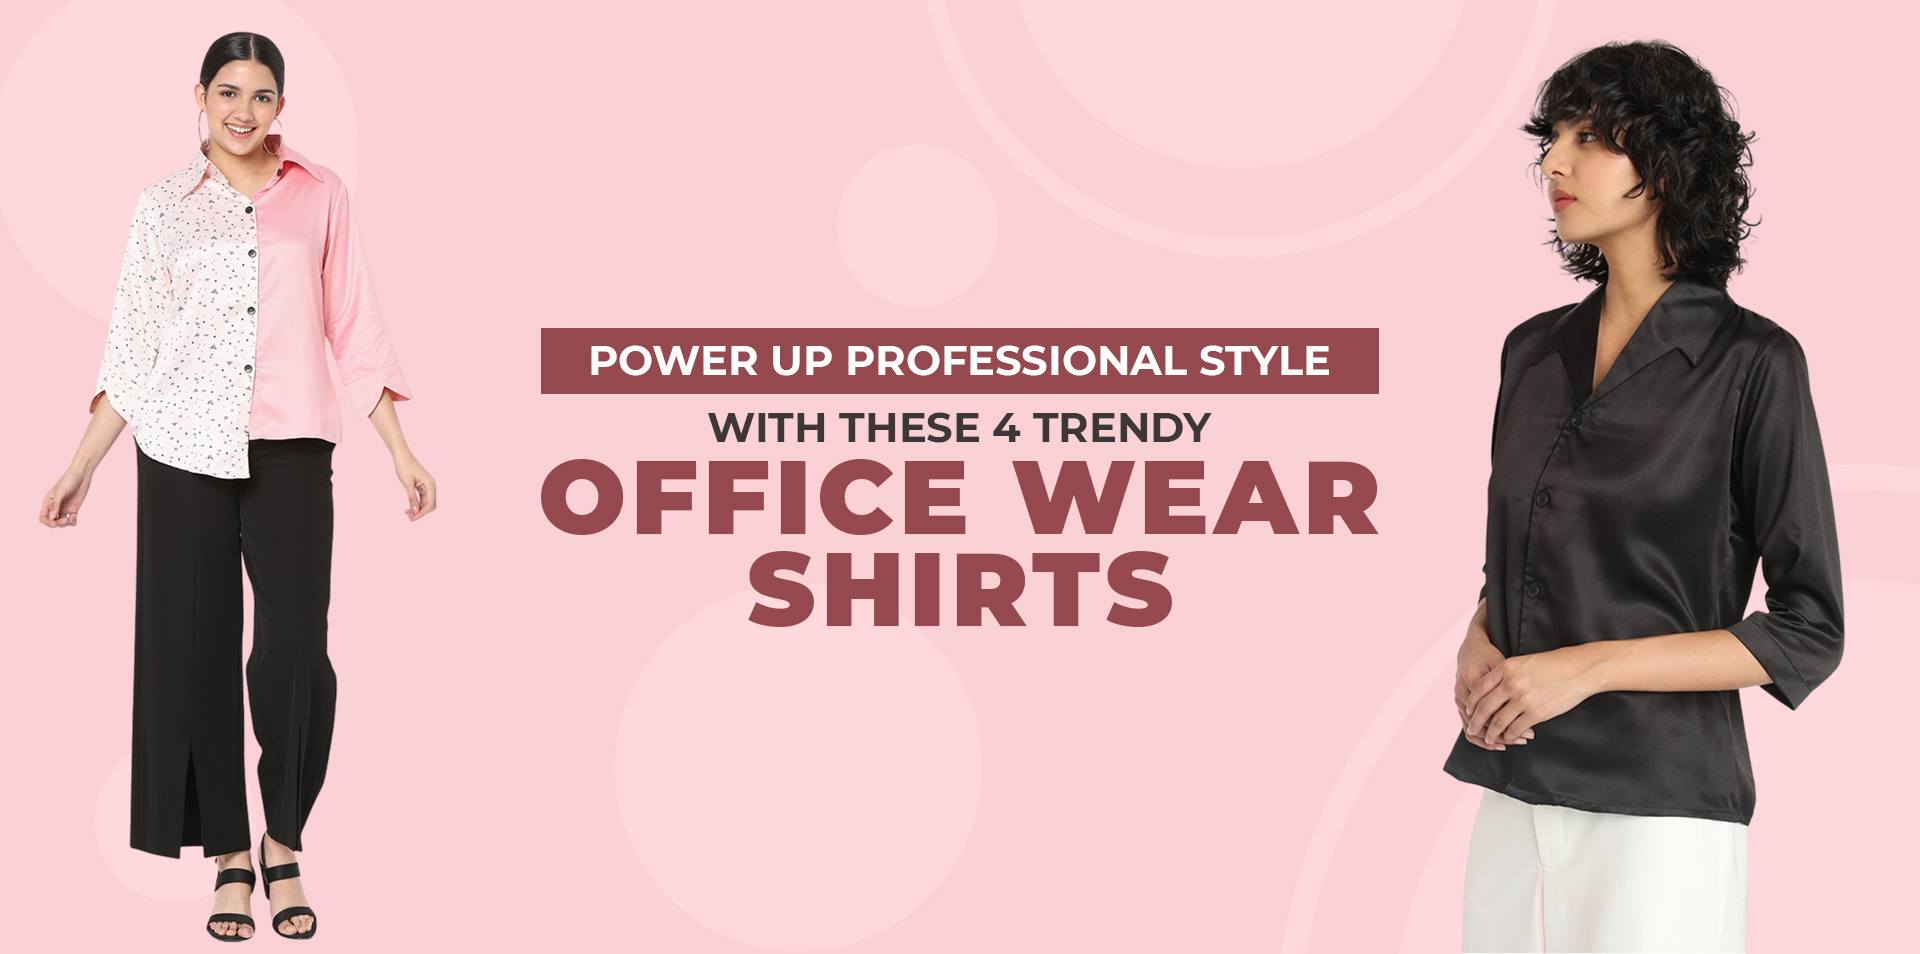 Power Up Professional Style with these 4 Trendy Office Wear Shirts